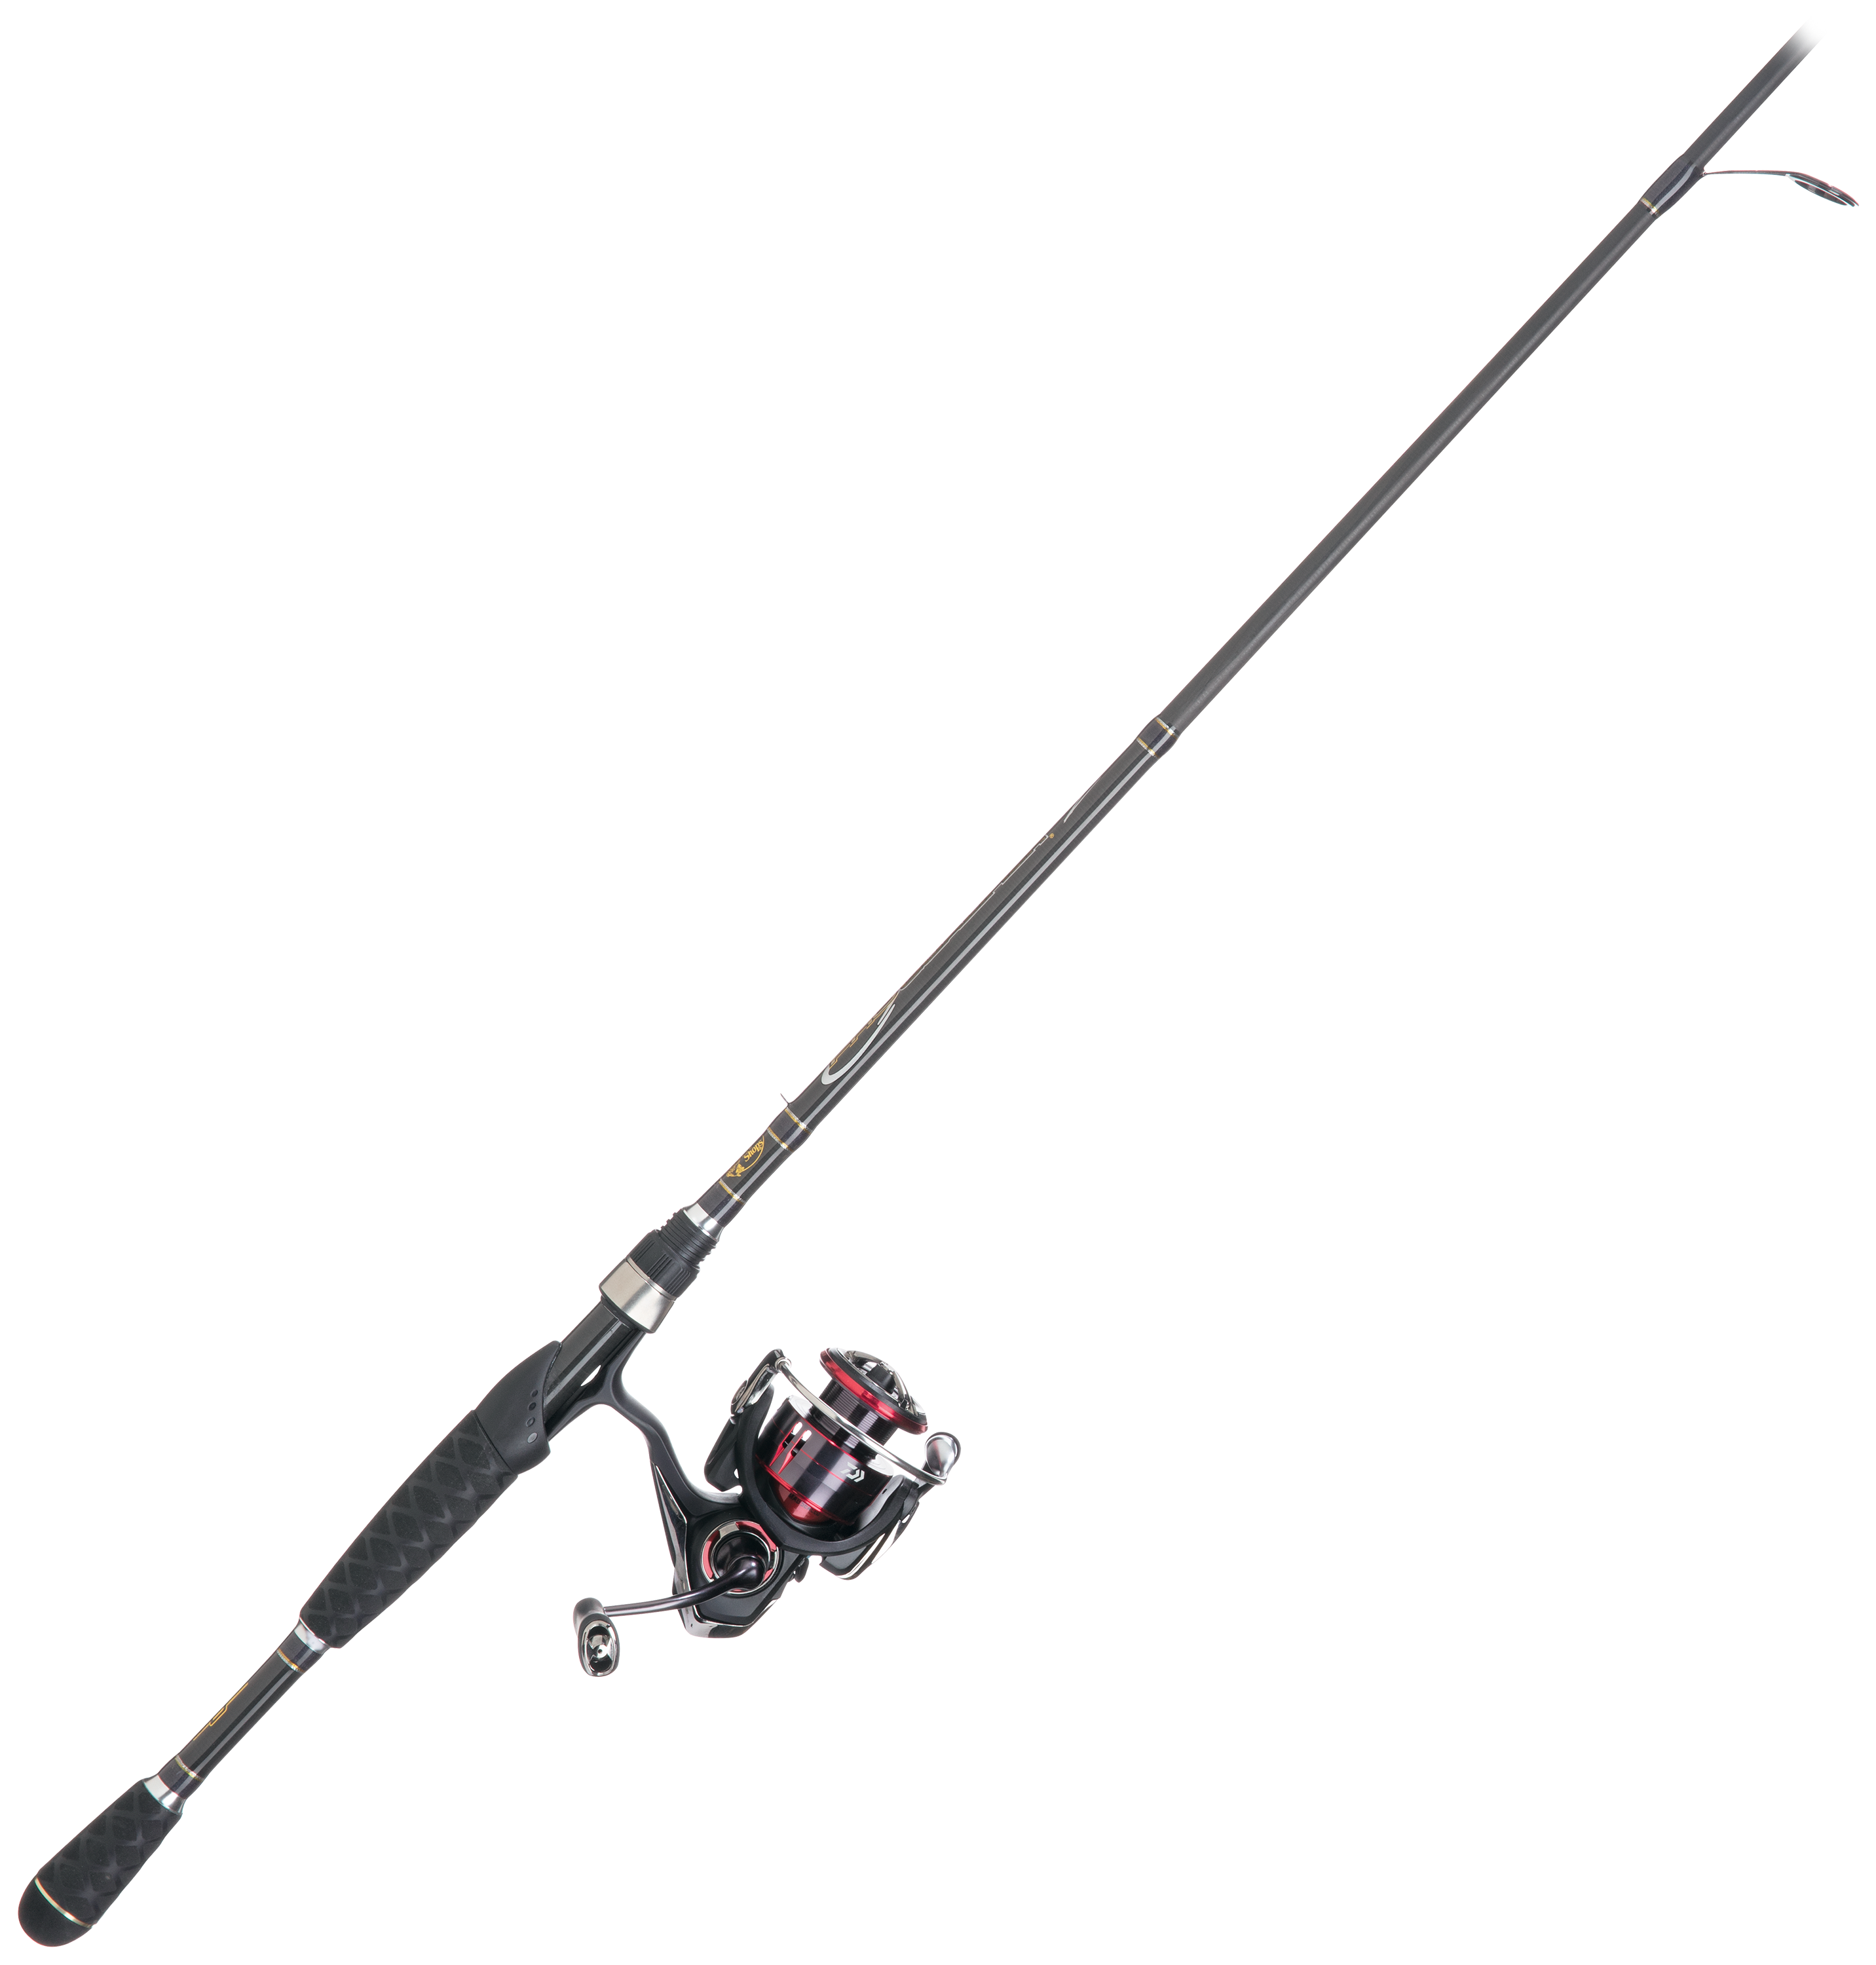 Daiwa Fuego LT/Bass Pro Shops Pro Qualifier 2 Spinning Rod and Reel Combo - FGLT2500D-XH/PQ68ML